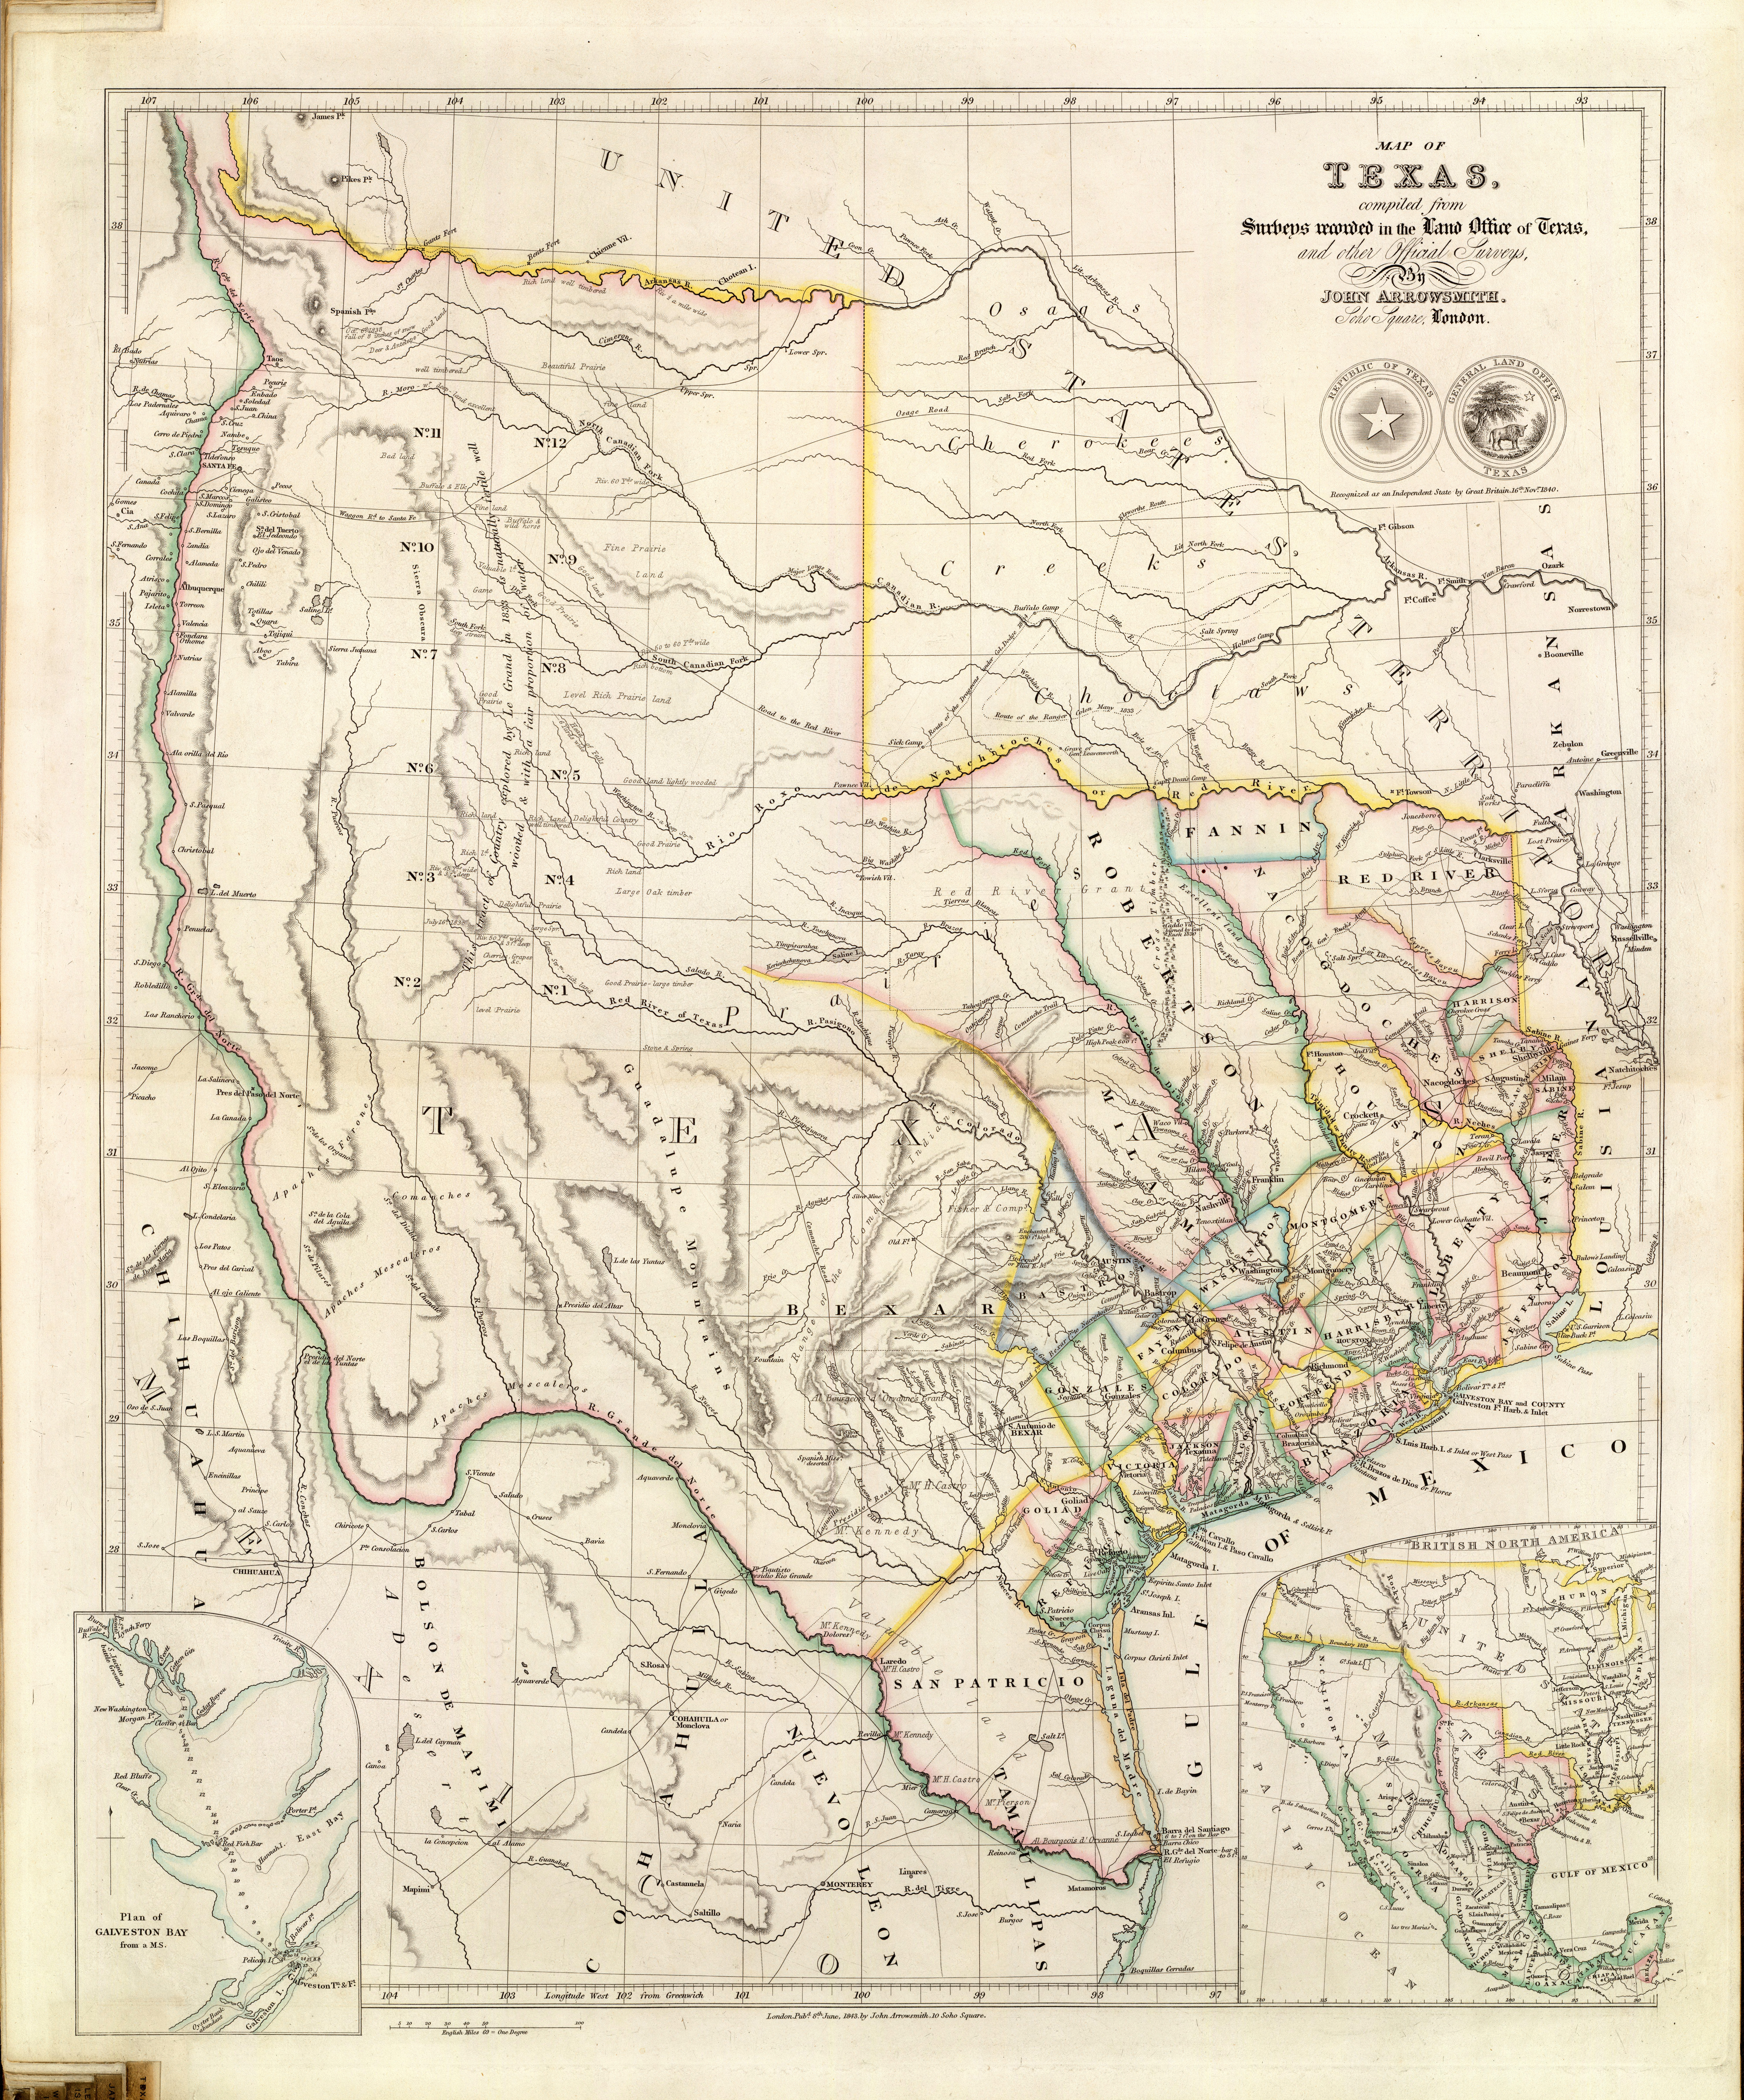 Imagining Texas: An Historical Journey With Maps | The History Center - Texas Land Office Maps